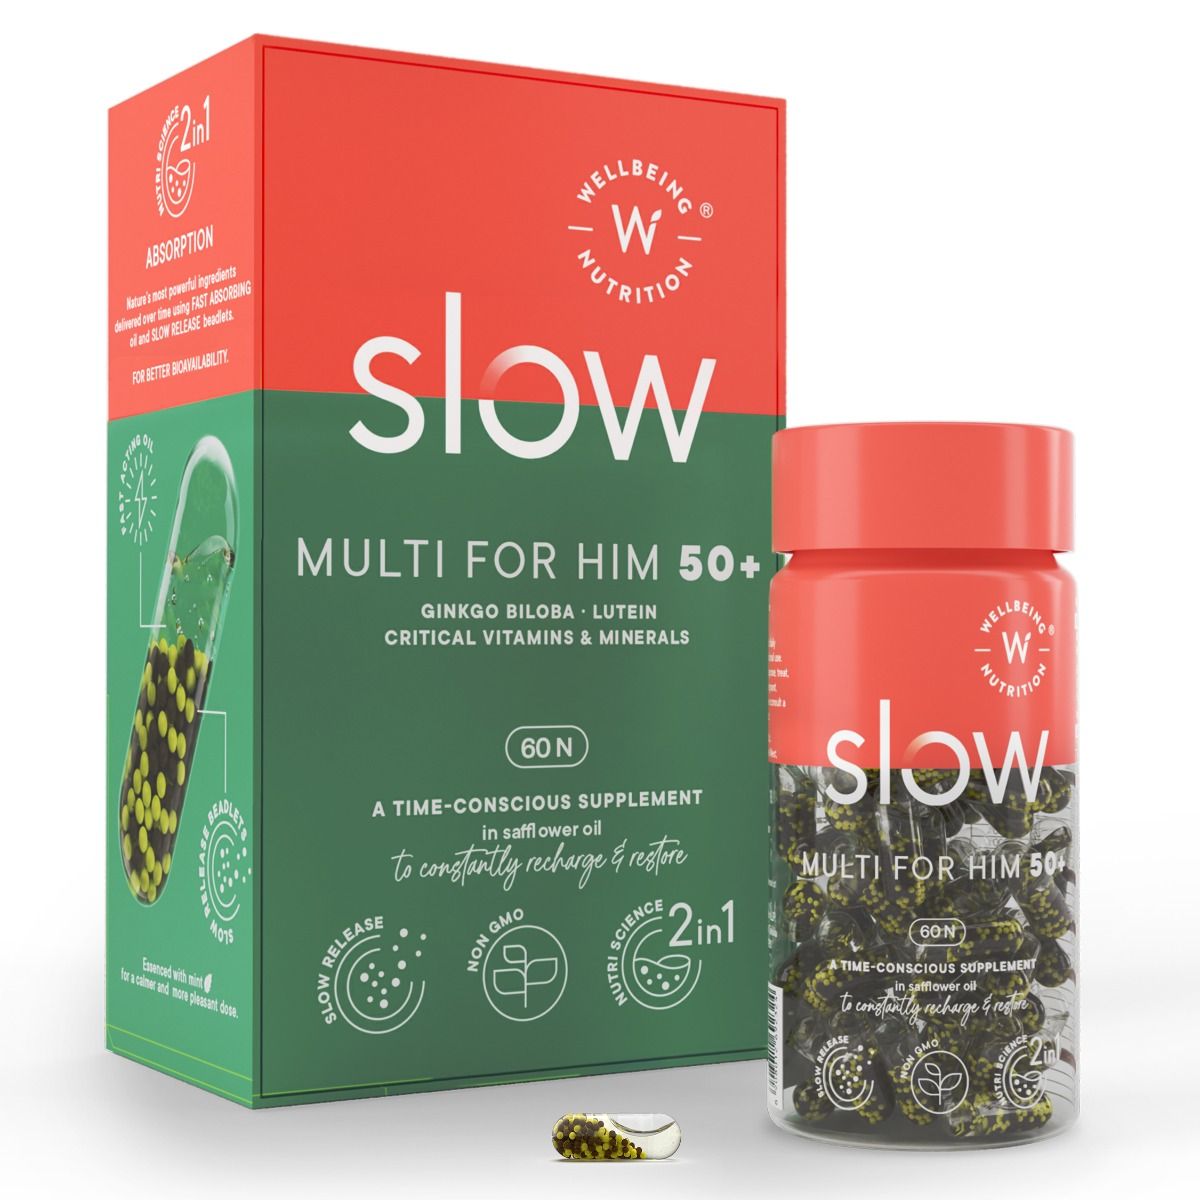 Wellbeing Nutrition Slow Multi for Him 50+, 60 Capsules, Pack of 1 